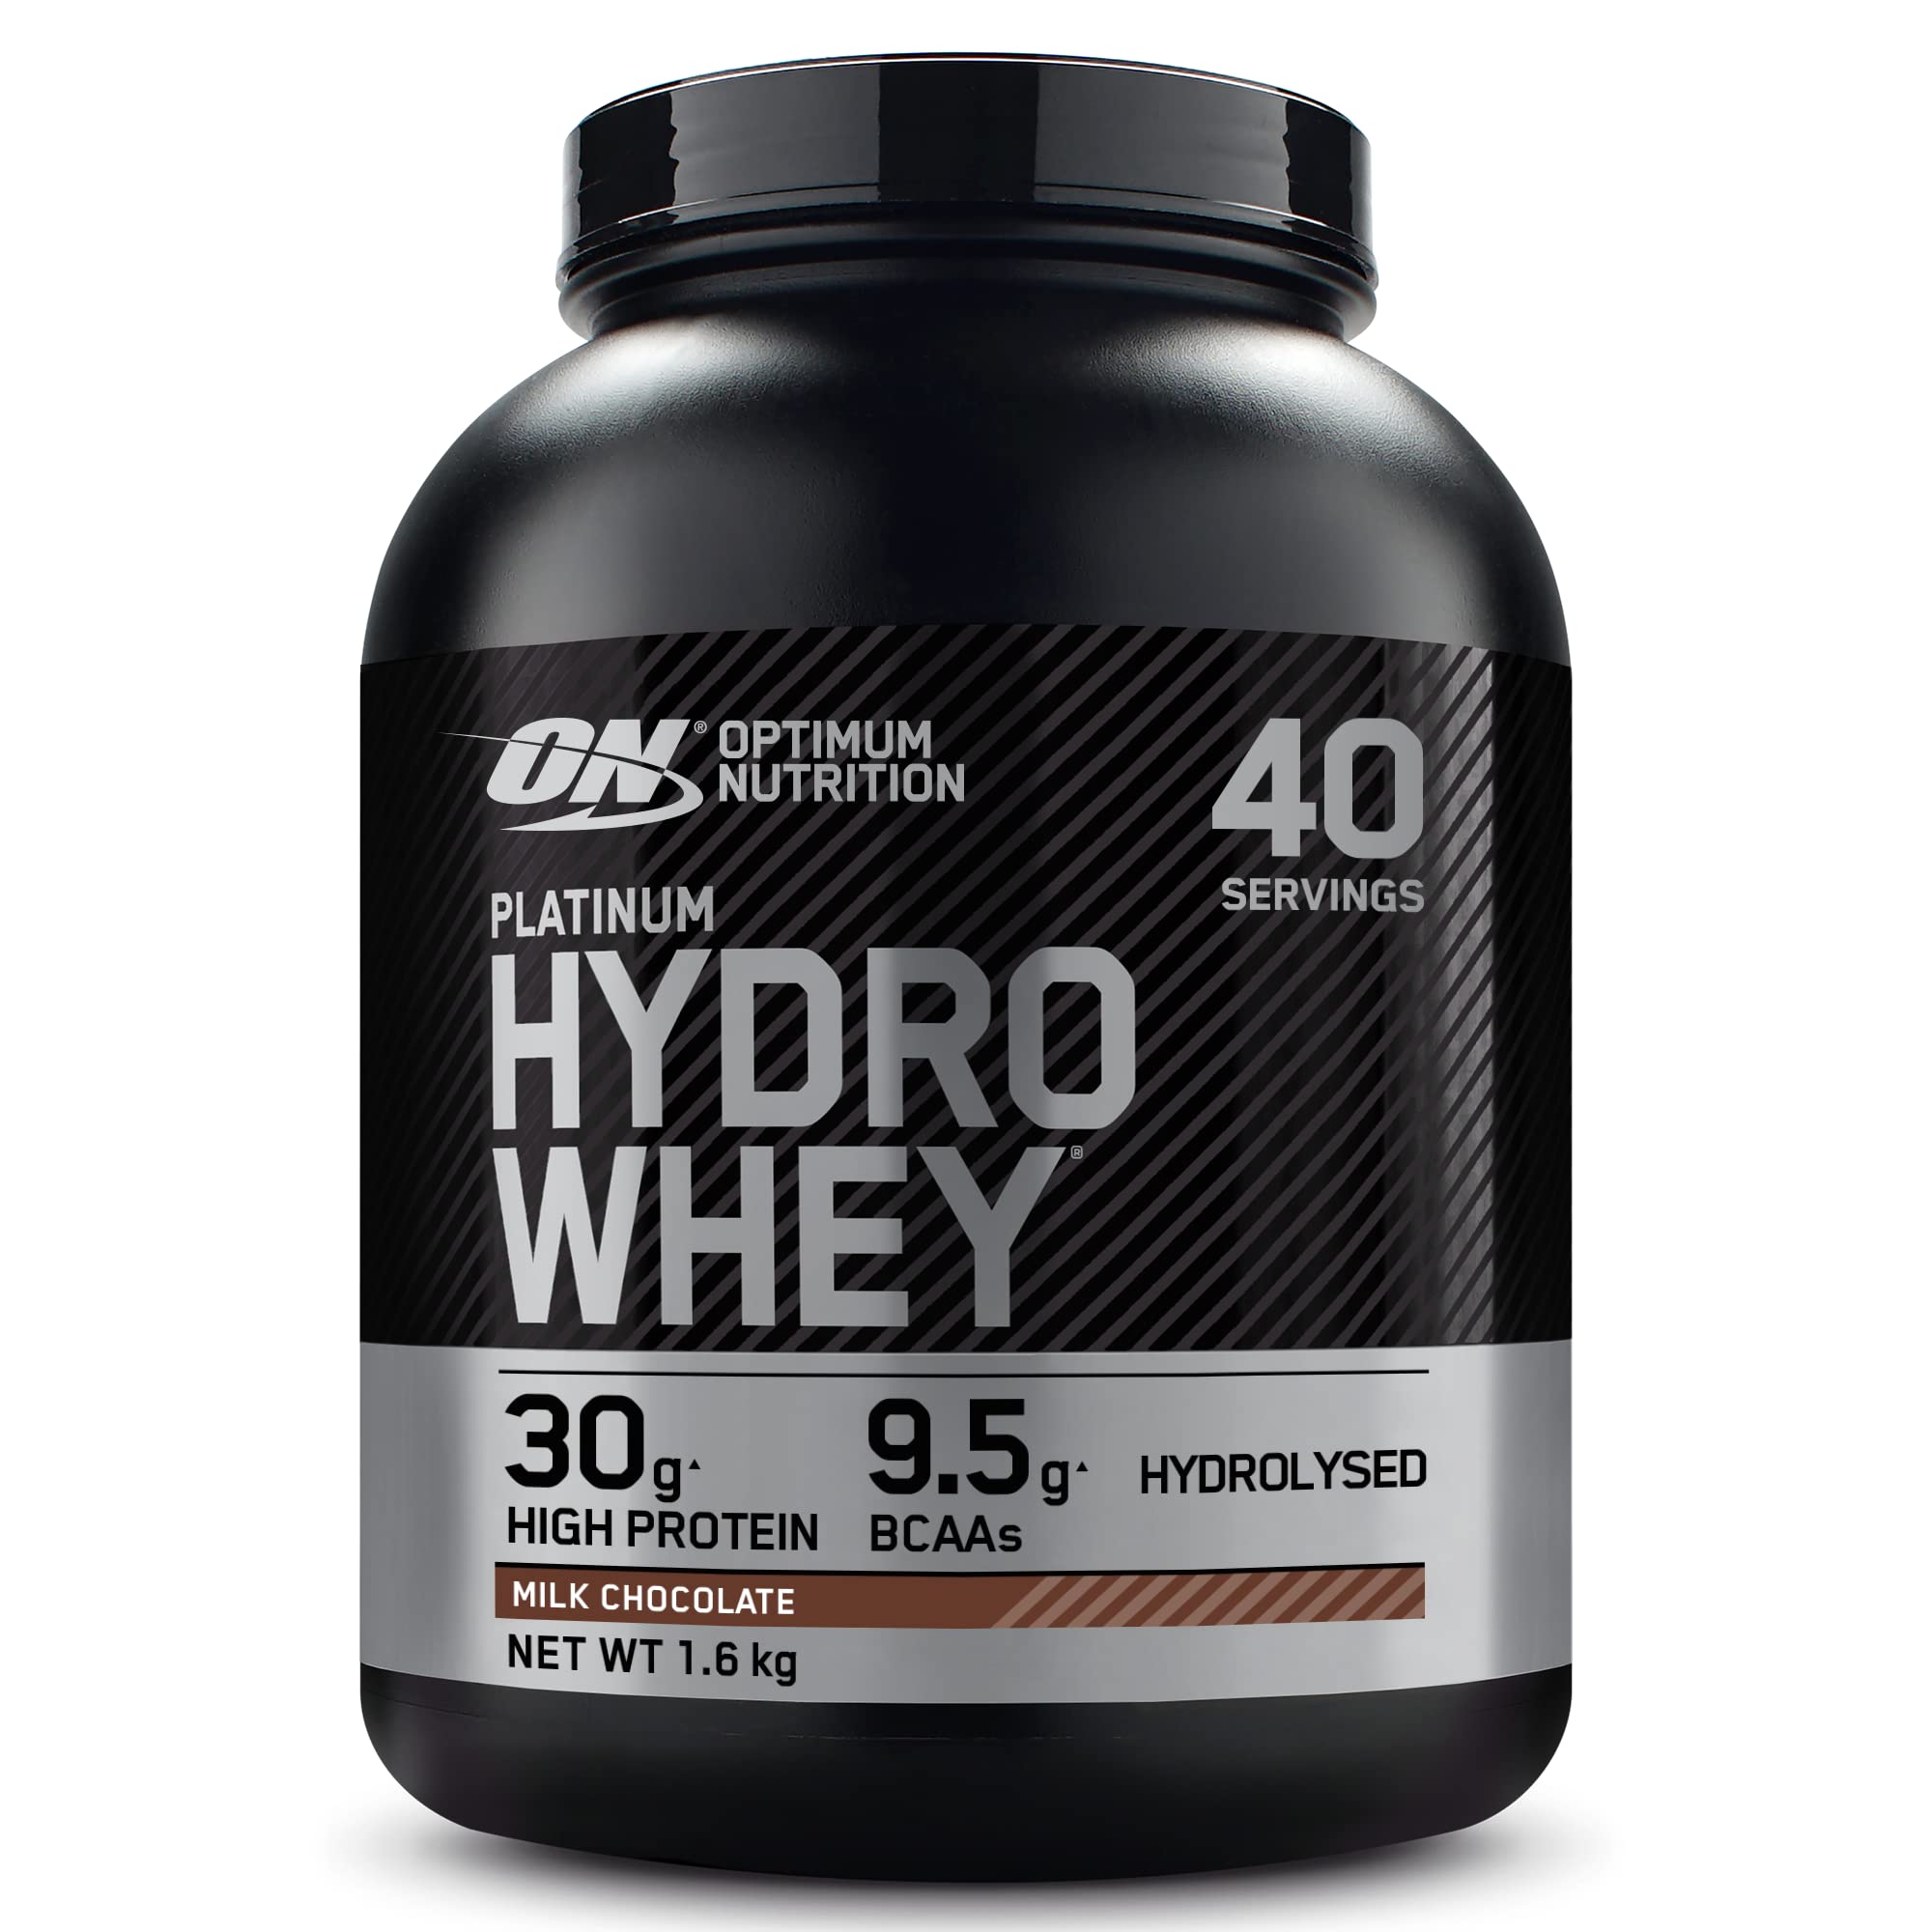 Optimum Nutrition ON Hydro Whey, Hydrolysed Whey Protein Isolate with Essential Amino Acids, Glutamine and BCAA, Milk Chocolate, 40 Servings, 1.6 kg, Packaging May Vary